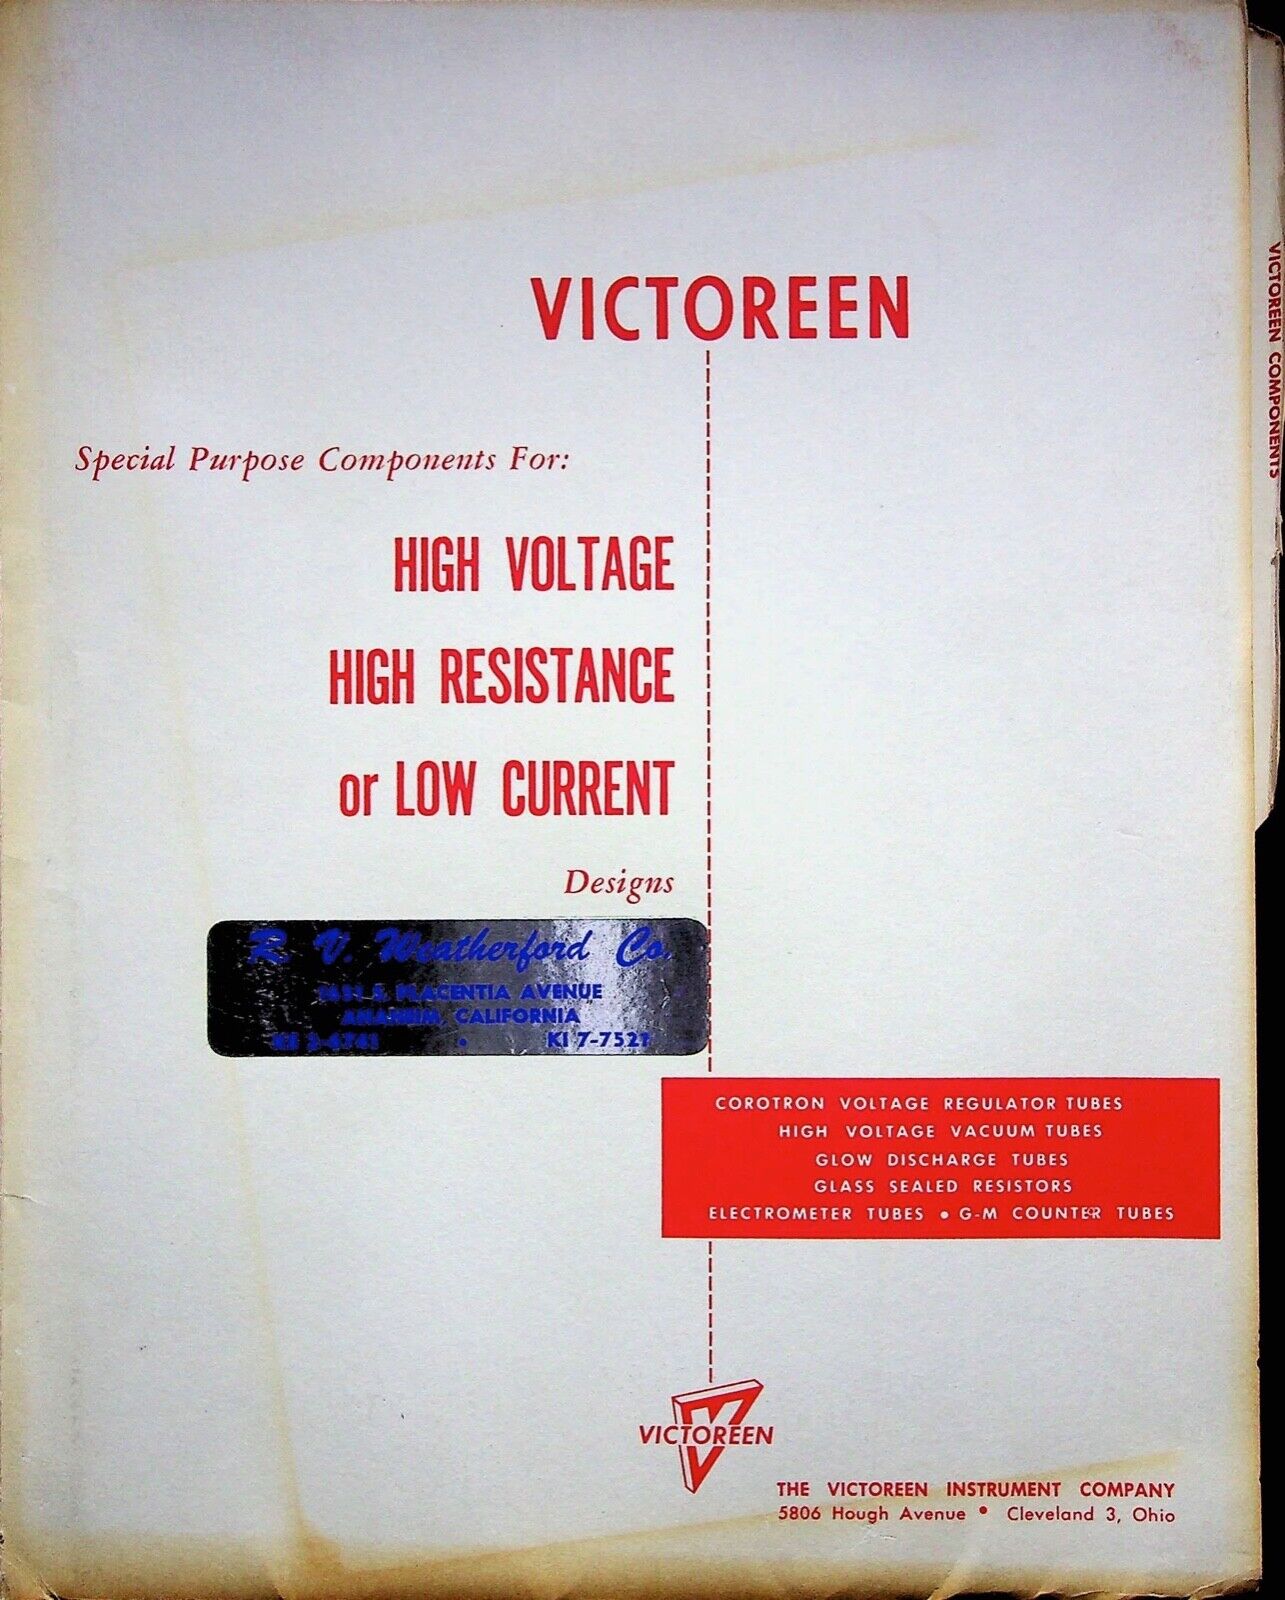 VICTOREEN SPECIAL PURPOSE COMPONENTS FOR: HIGH VOLTAGE HIGH RESISTANCE CATALOG